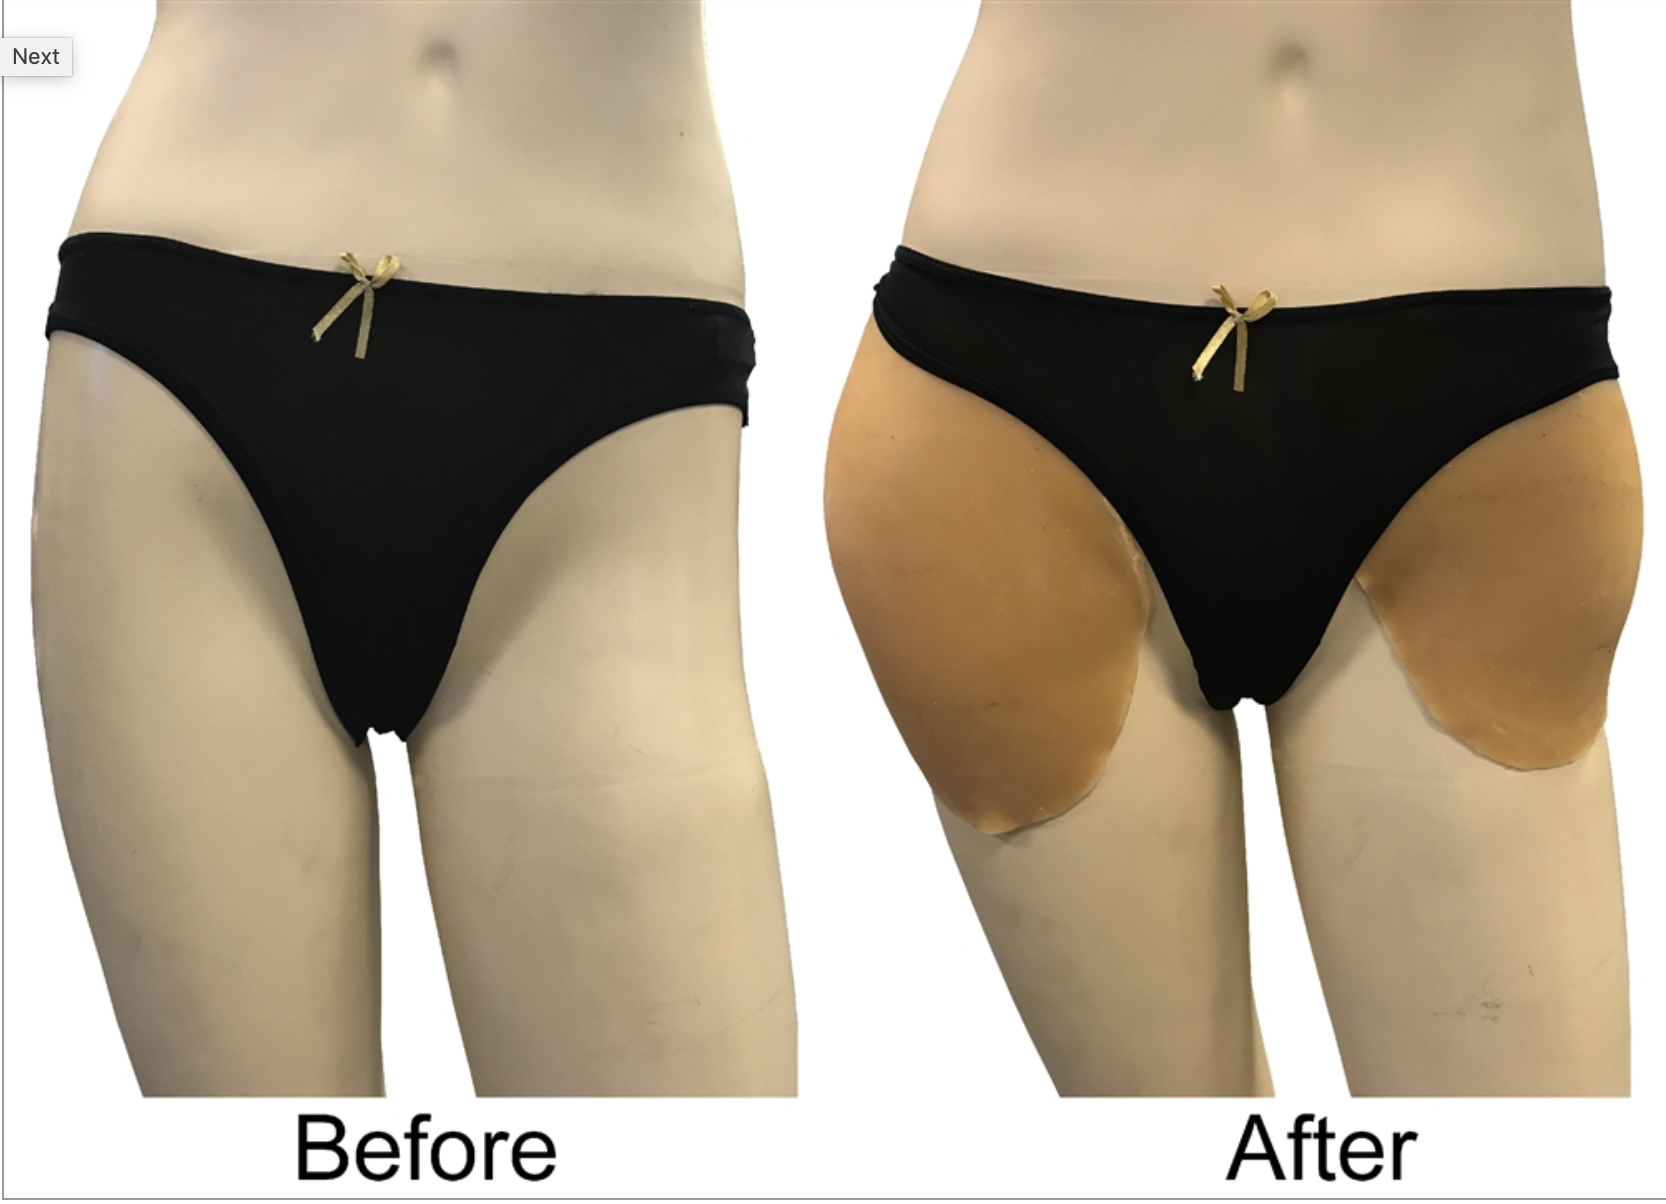 Perfect Silicone Hip and Butt Pad